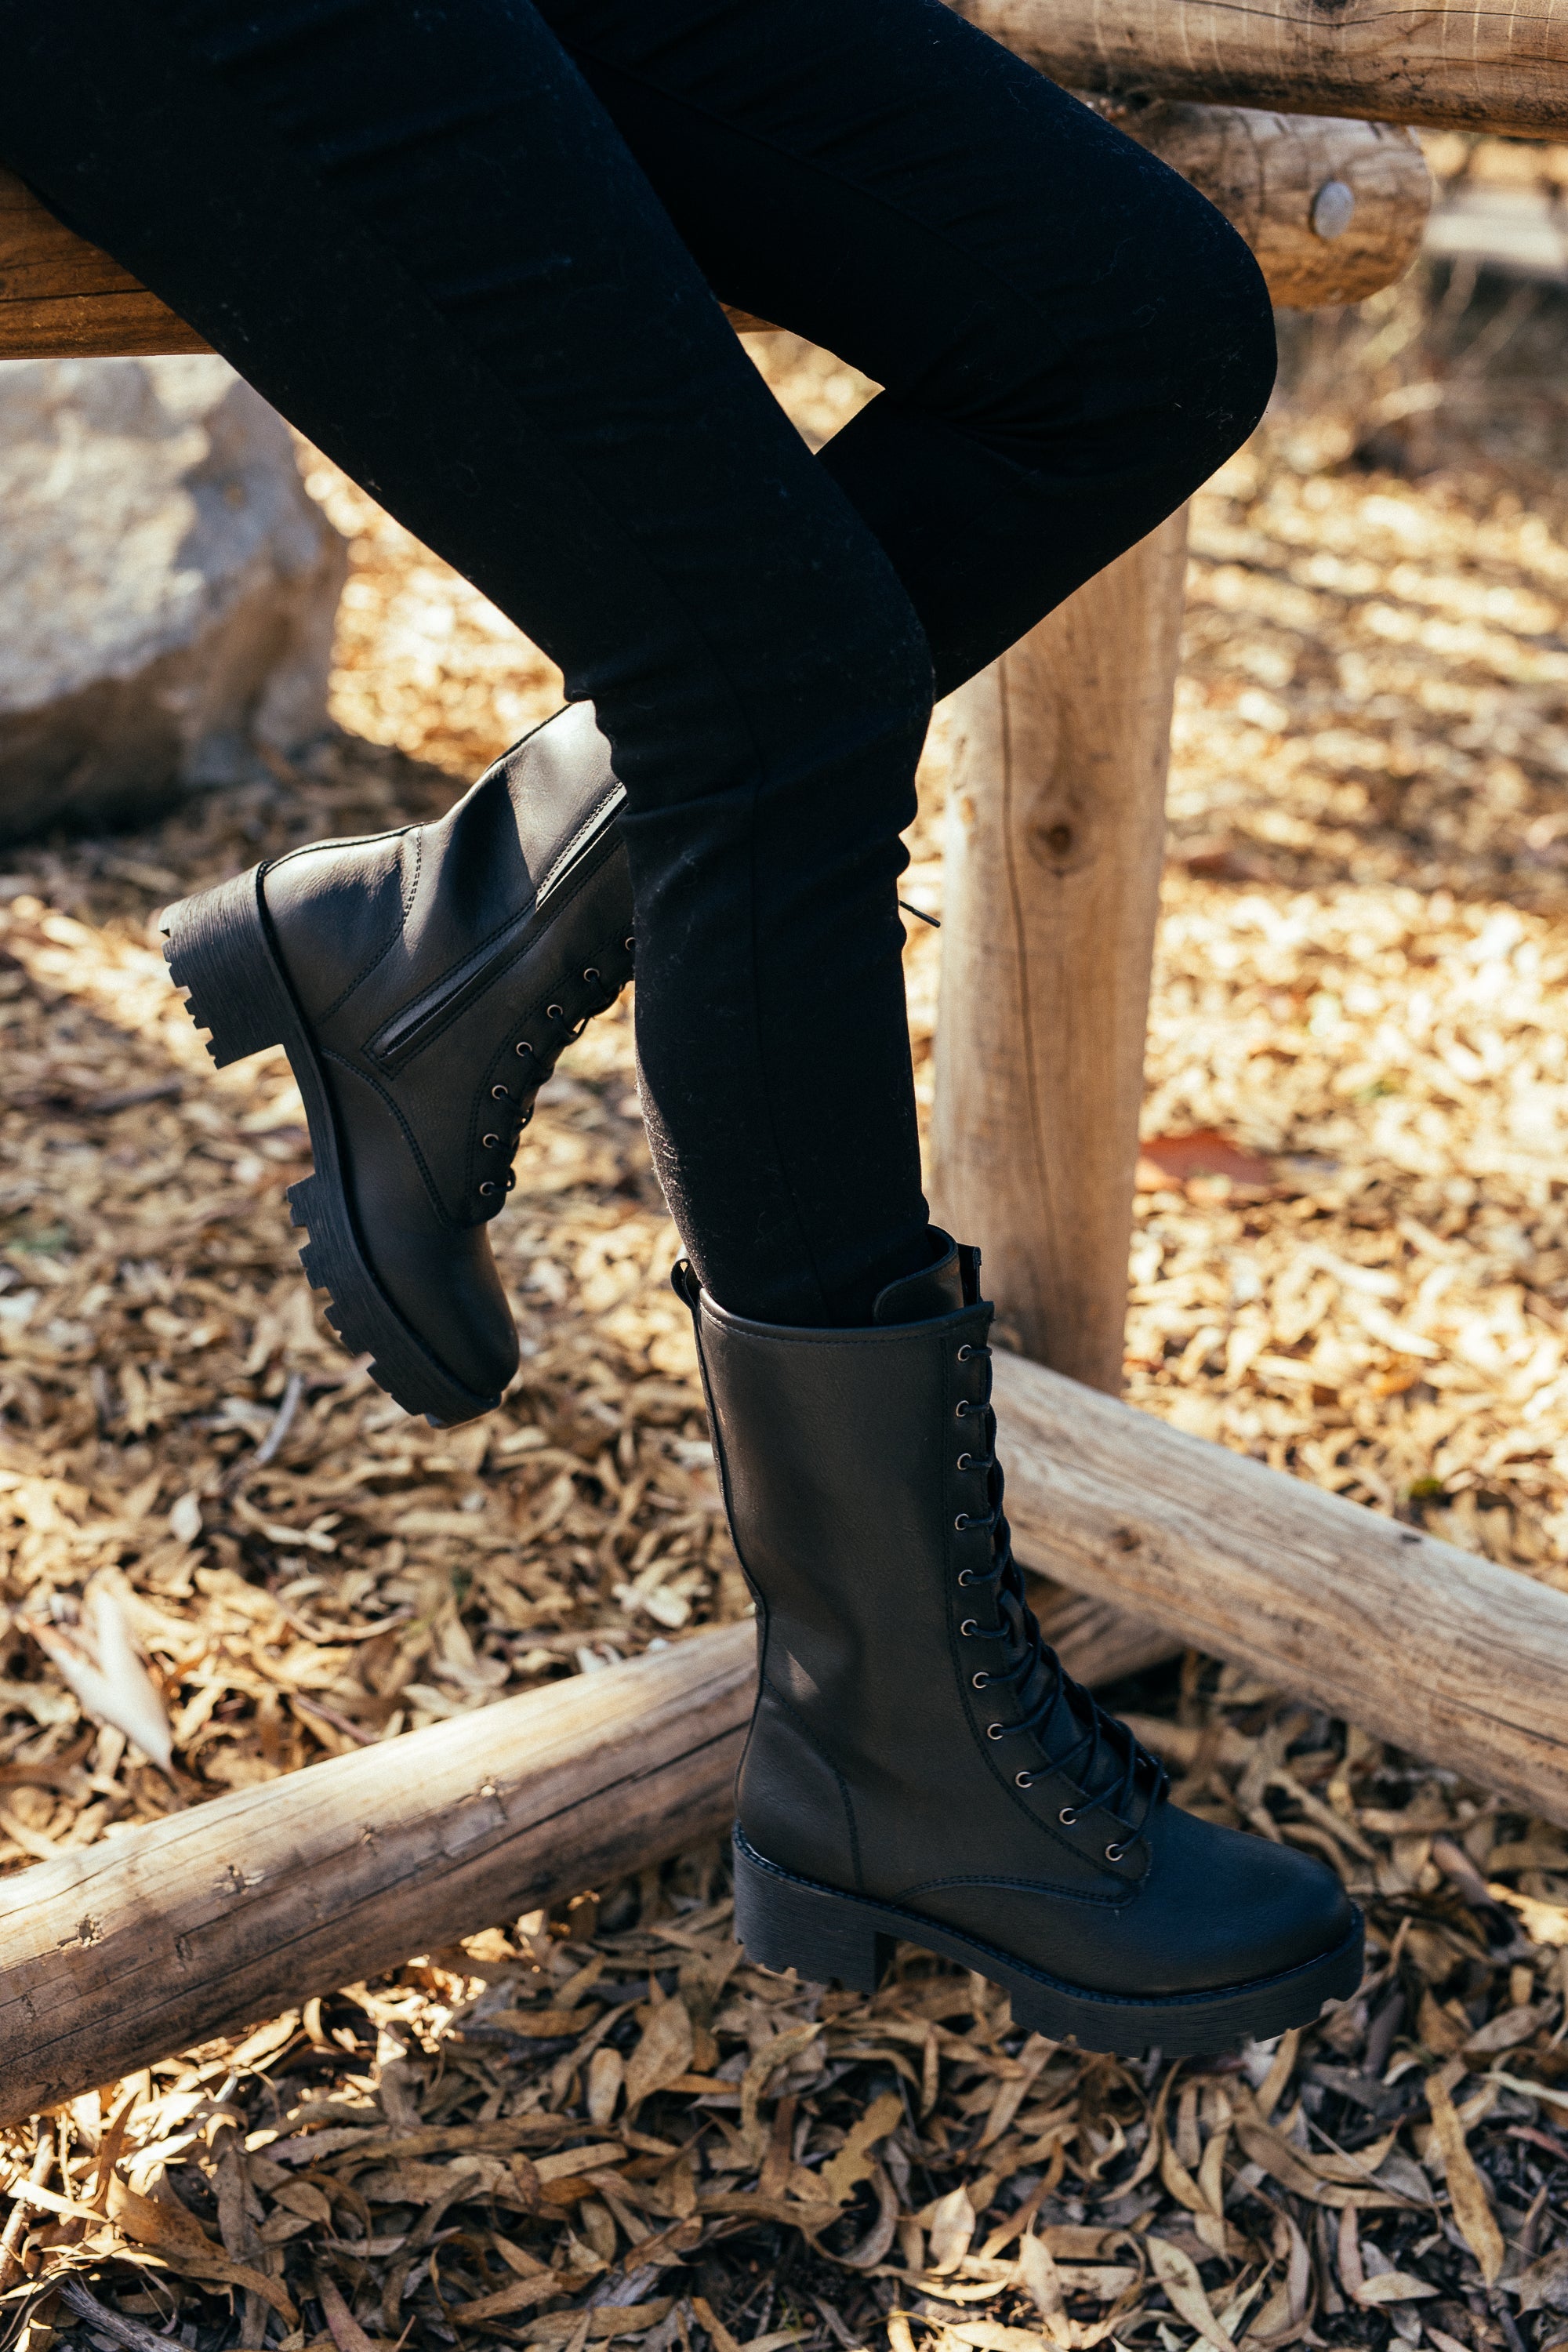 Buy Women's Private Boots Black by Nest Shoes